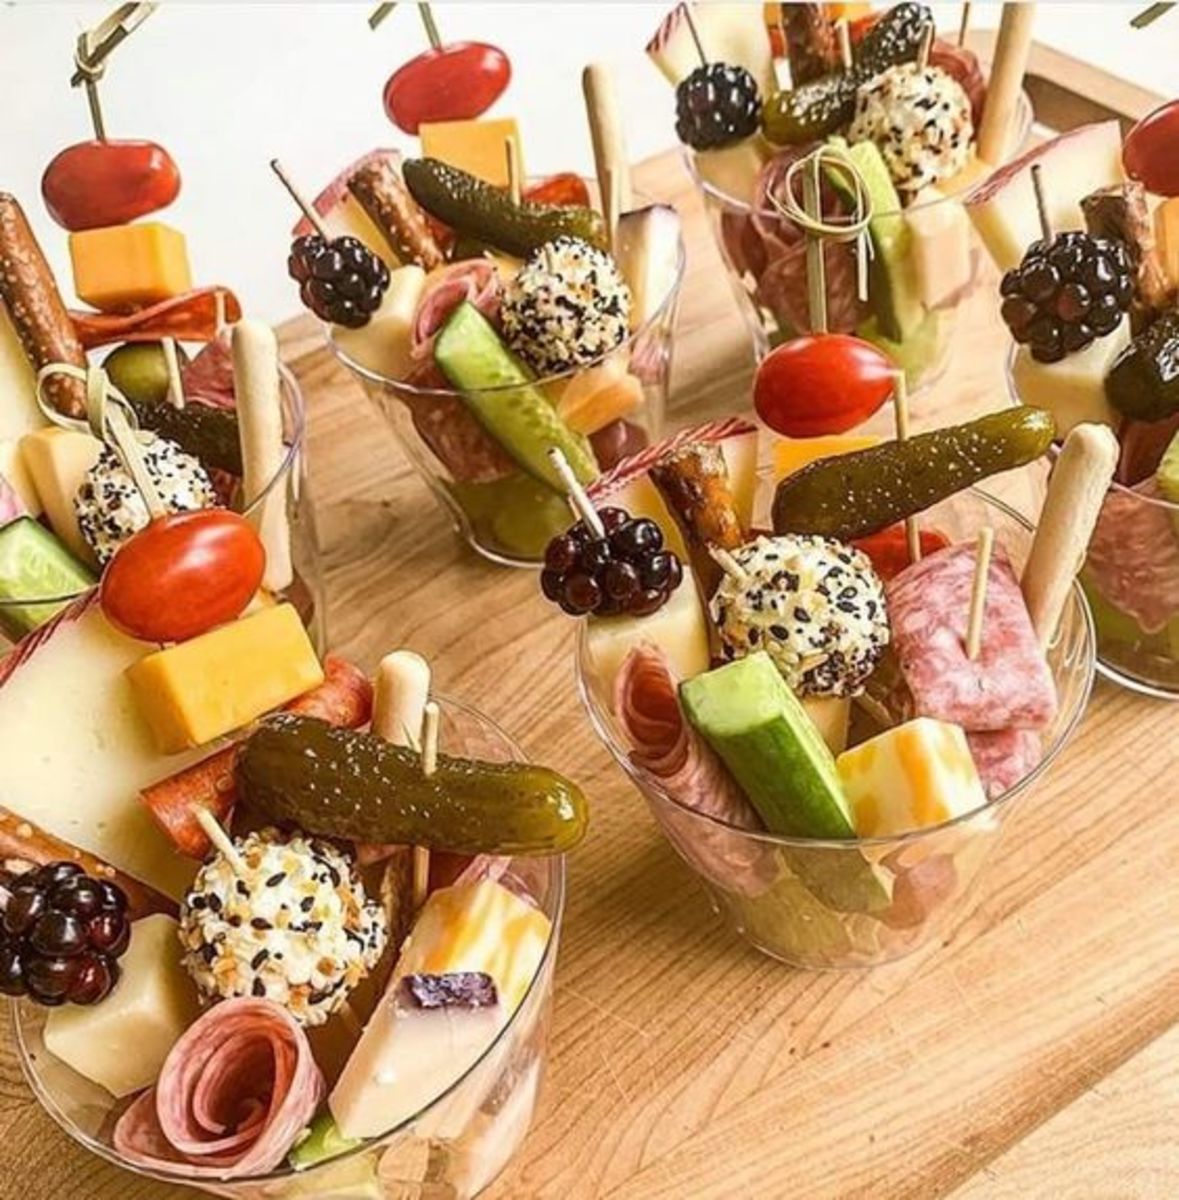 35+ Gorgeous Mothers Day Brunch Ideas To Show Your Love - HubPages